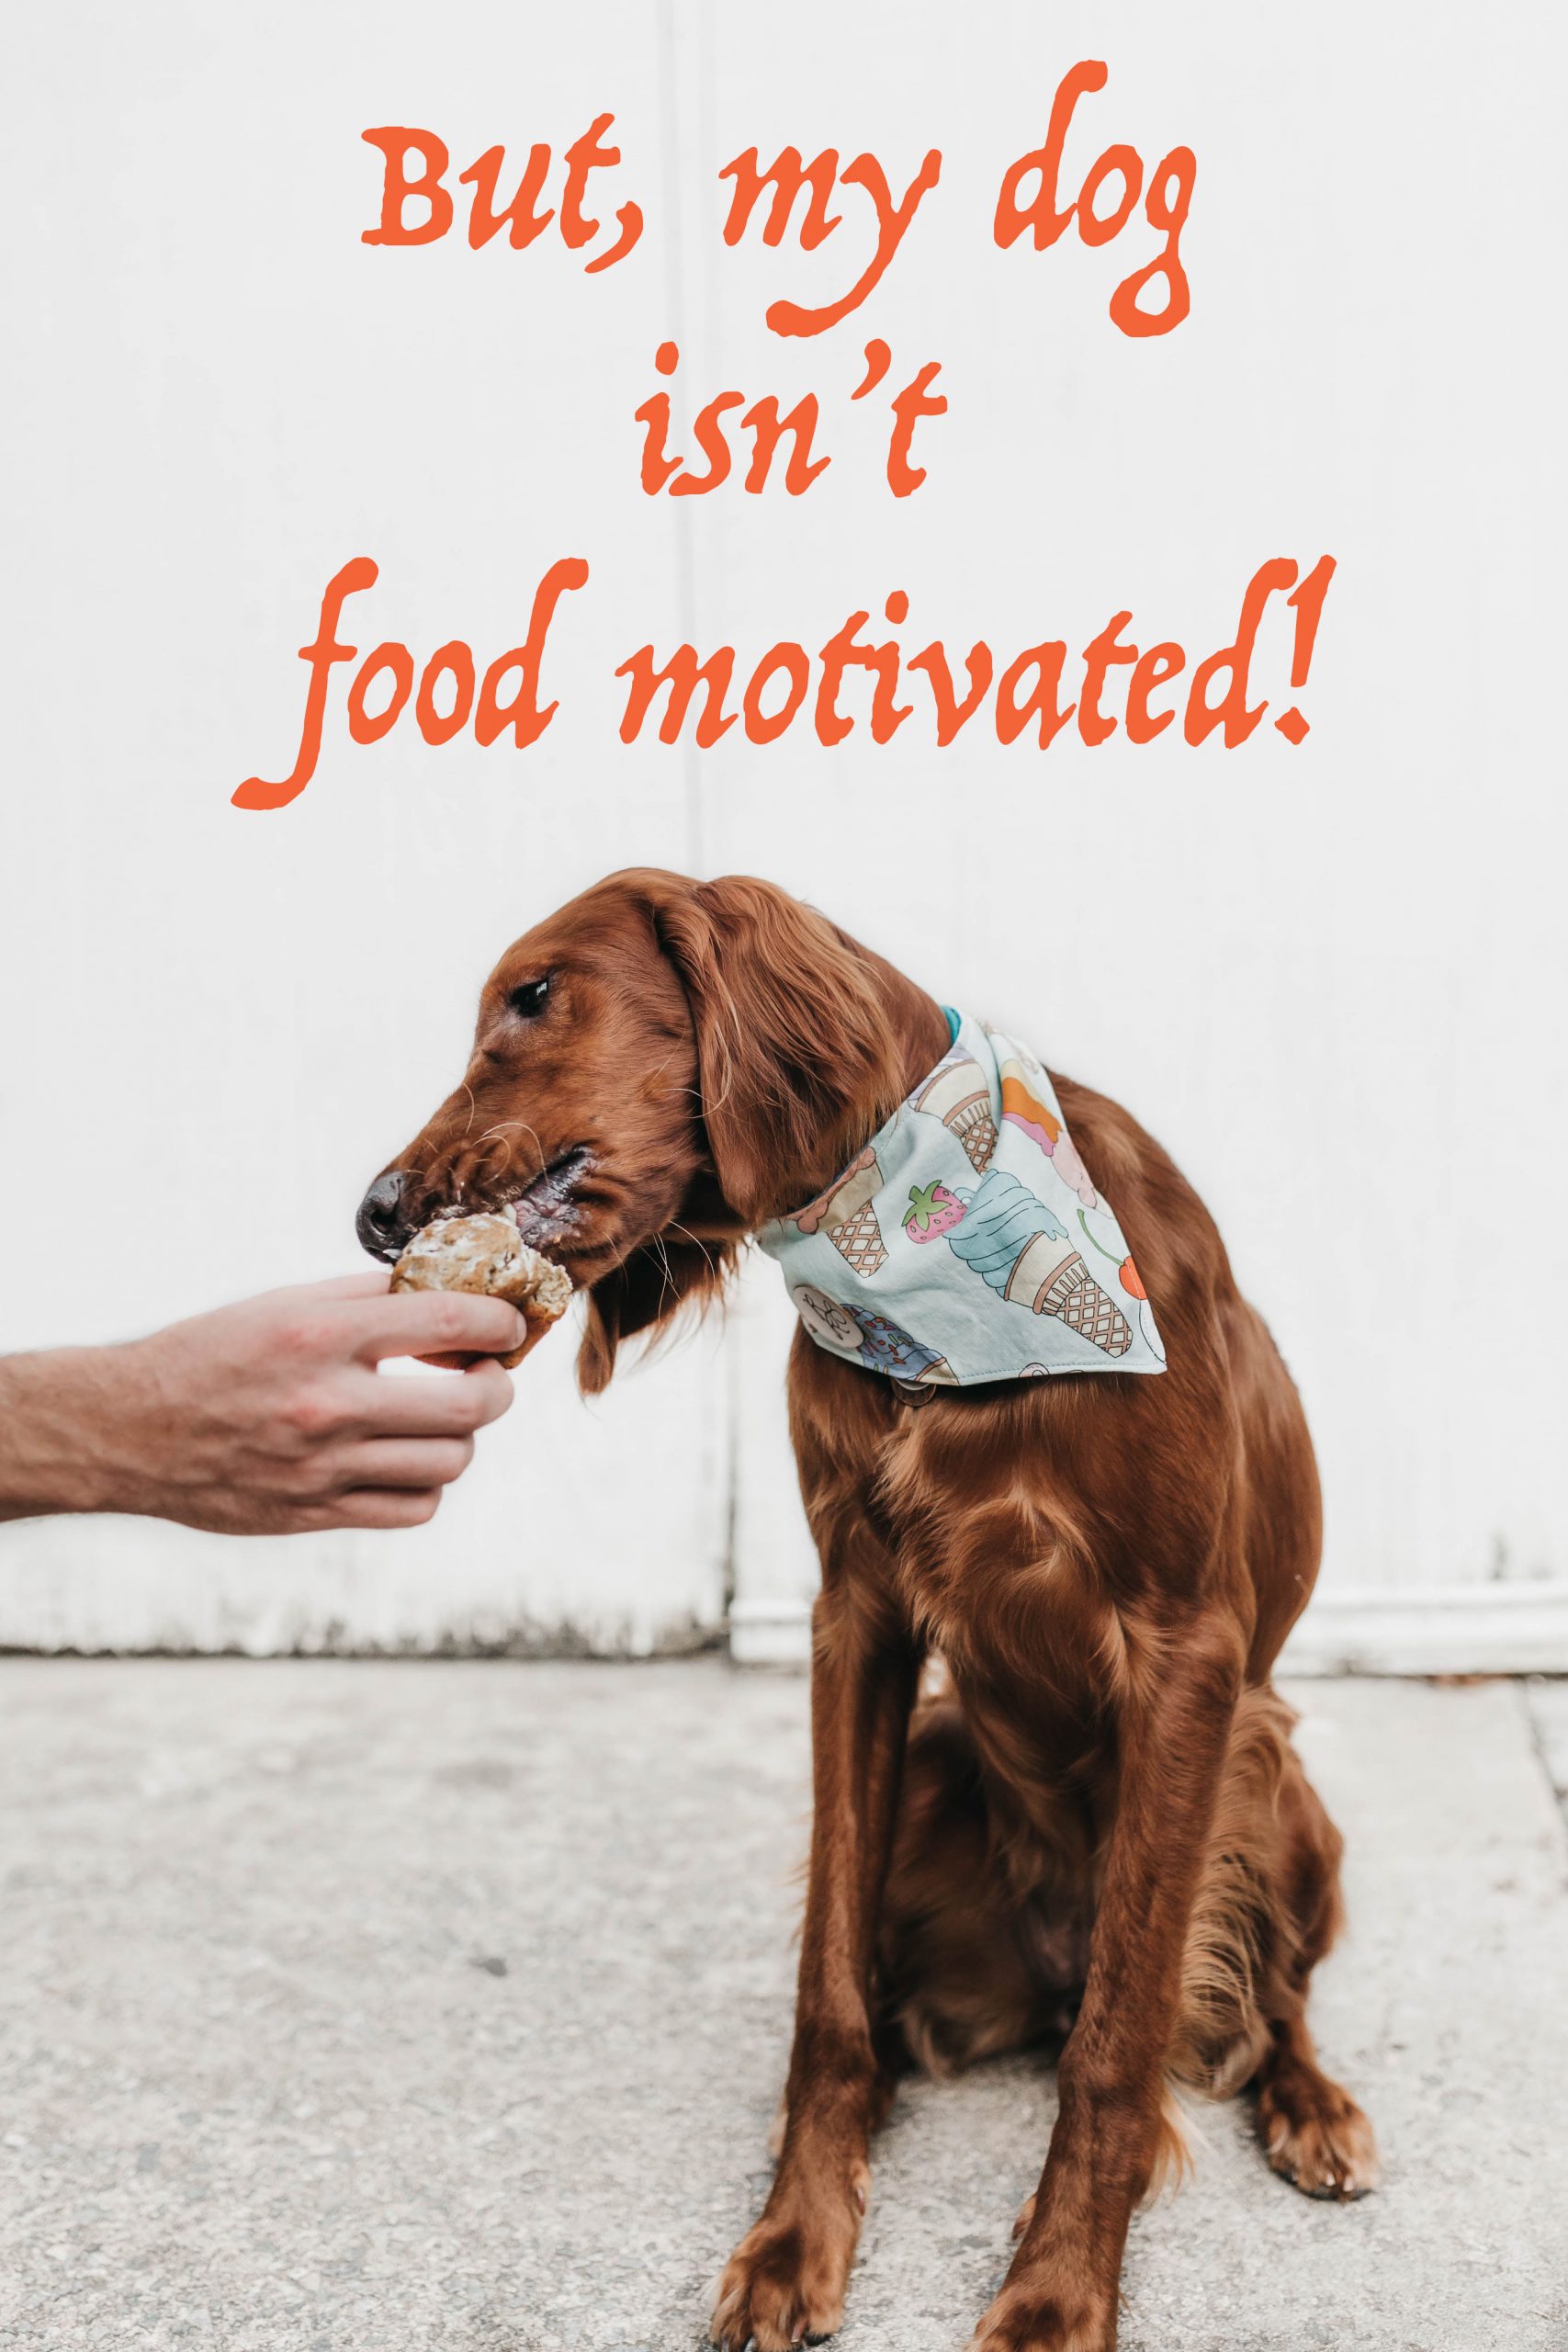 But, my dog isn’t food motivated!